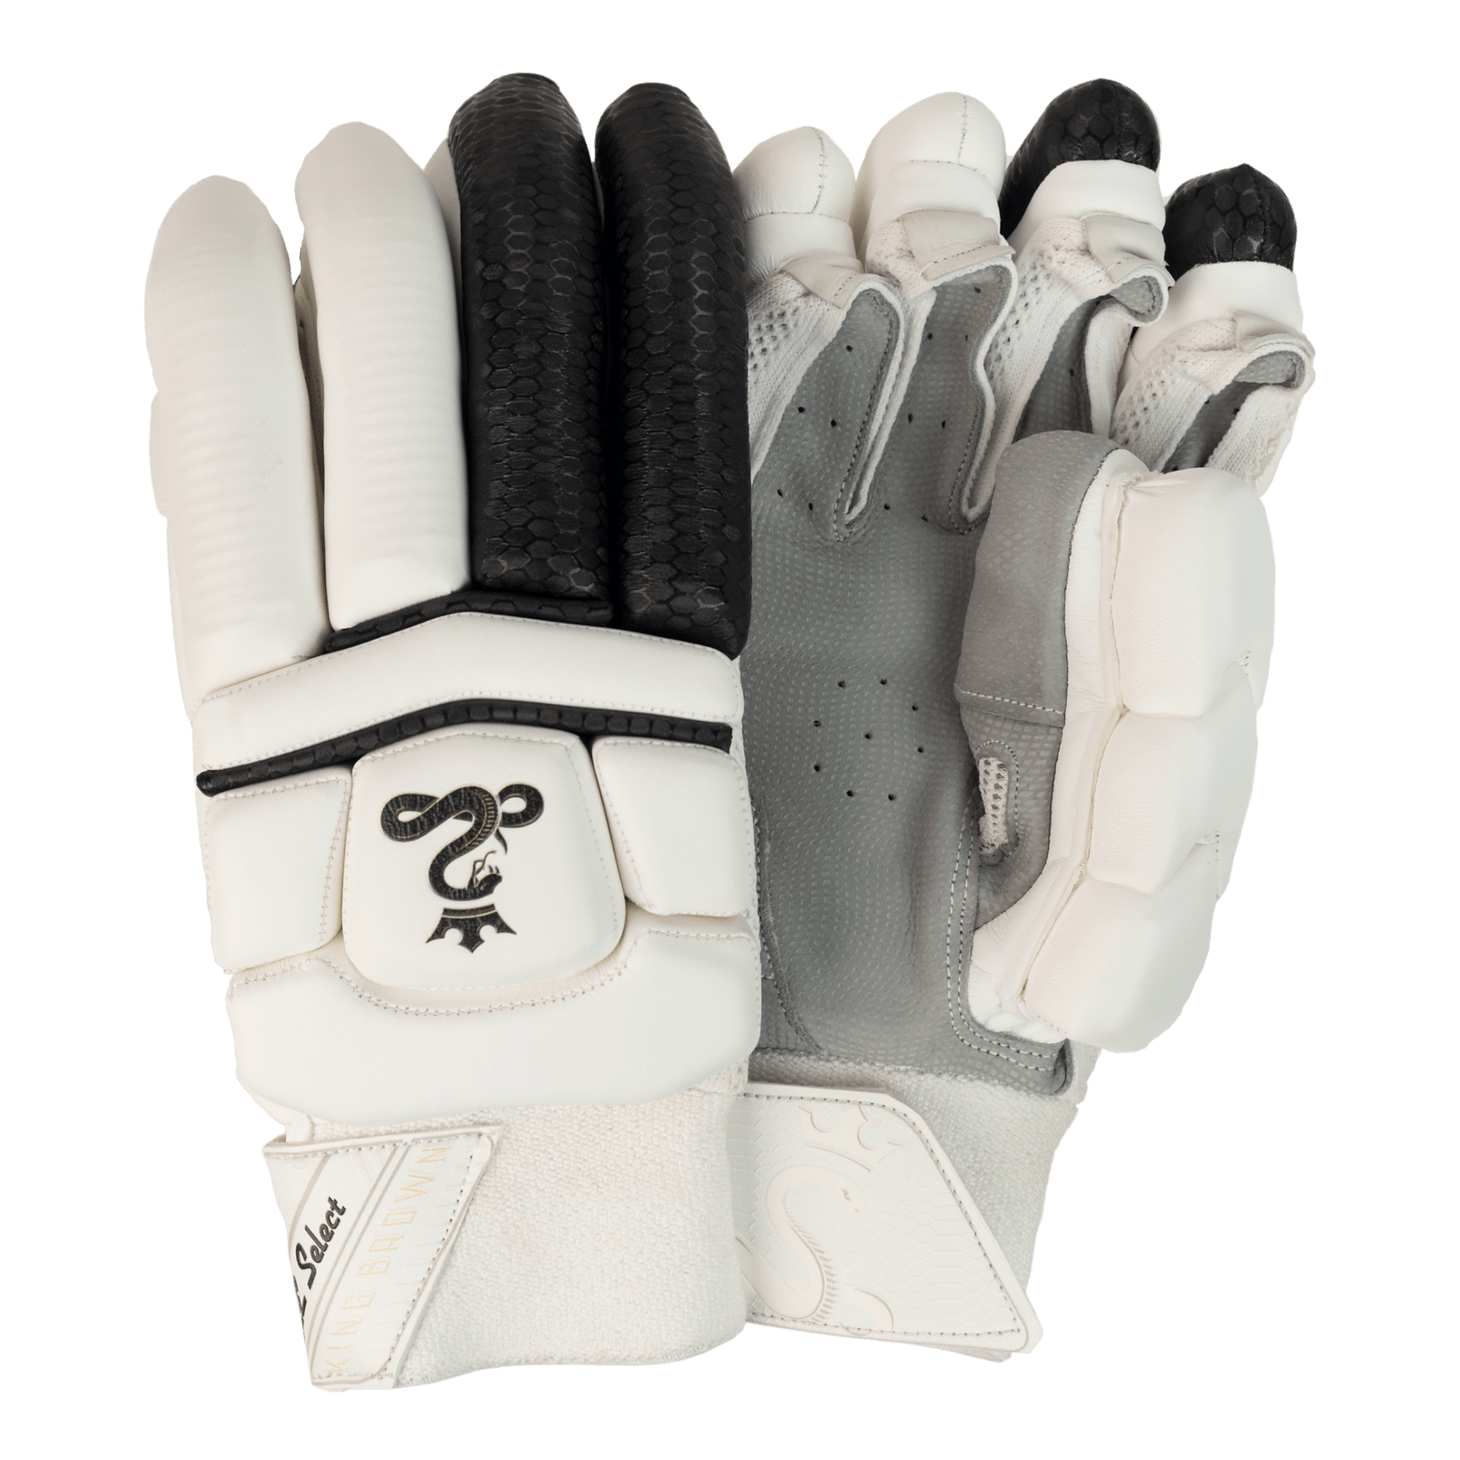 King Brown Batting Gloves King Brown Select Players LE Adult Batting Gloves